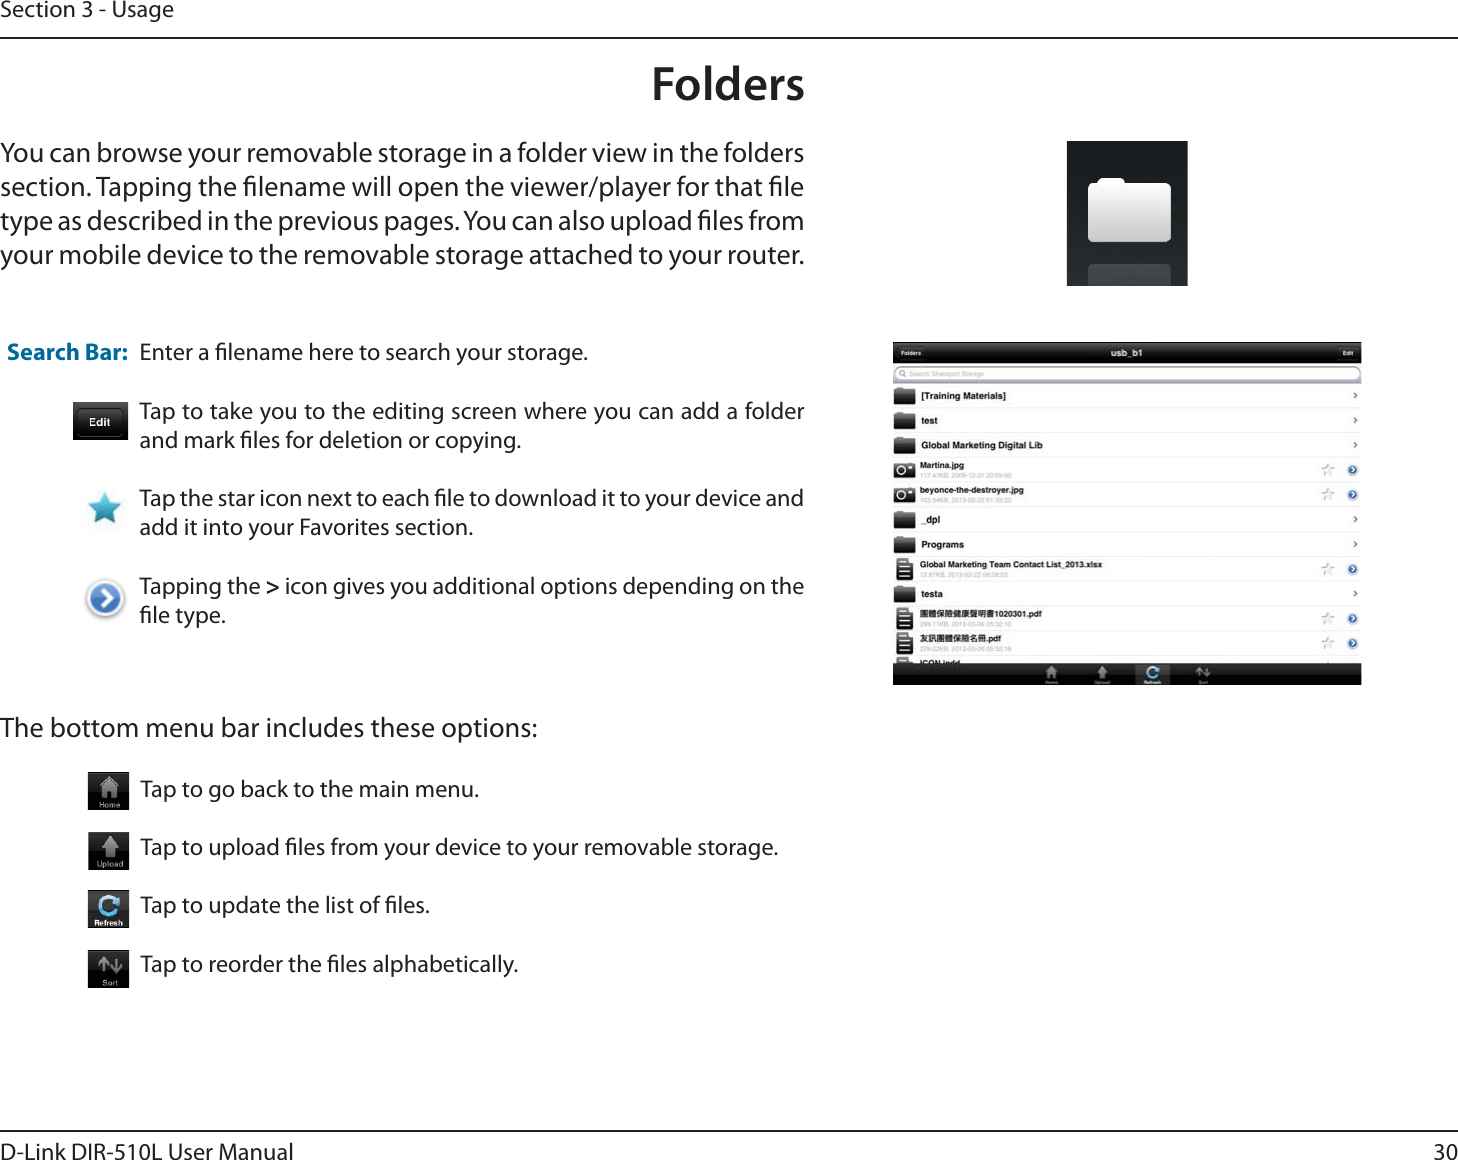 30D-Link DIR-510L User ManualSection 3 - UsageFoldersYou can browse your removable storage in a folder view in the folders section. Tapping the lename will open the viewer/player for that le type as described in the previous pages. You can also upload les from your mobile device to the removable storage attached to your router.Enter a lename here to search your storage.Tap to take you to the editing screen where you can add a folder and mark les for deletion or copying.Tap the star icon next to each le to download it to your device and add it into your Favorites section.Tapping the &gt; icon gives you additional options depending on the le type.Search Bar:The bottom menu bar includes these options:Tap to go back to the main menu.Tap to upload les from your device to your removable storage.Tap to update the list of les.Tap to reorder the les alphabetically.